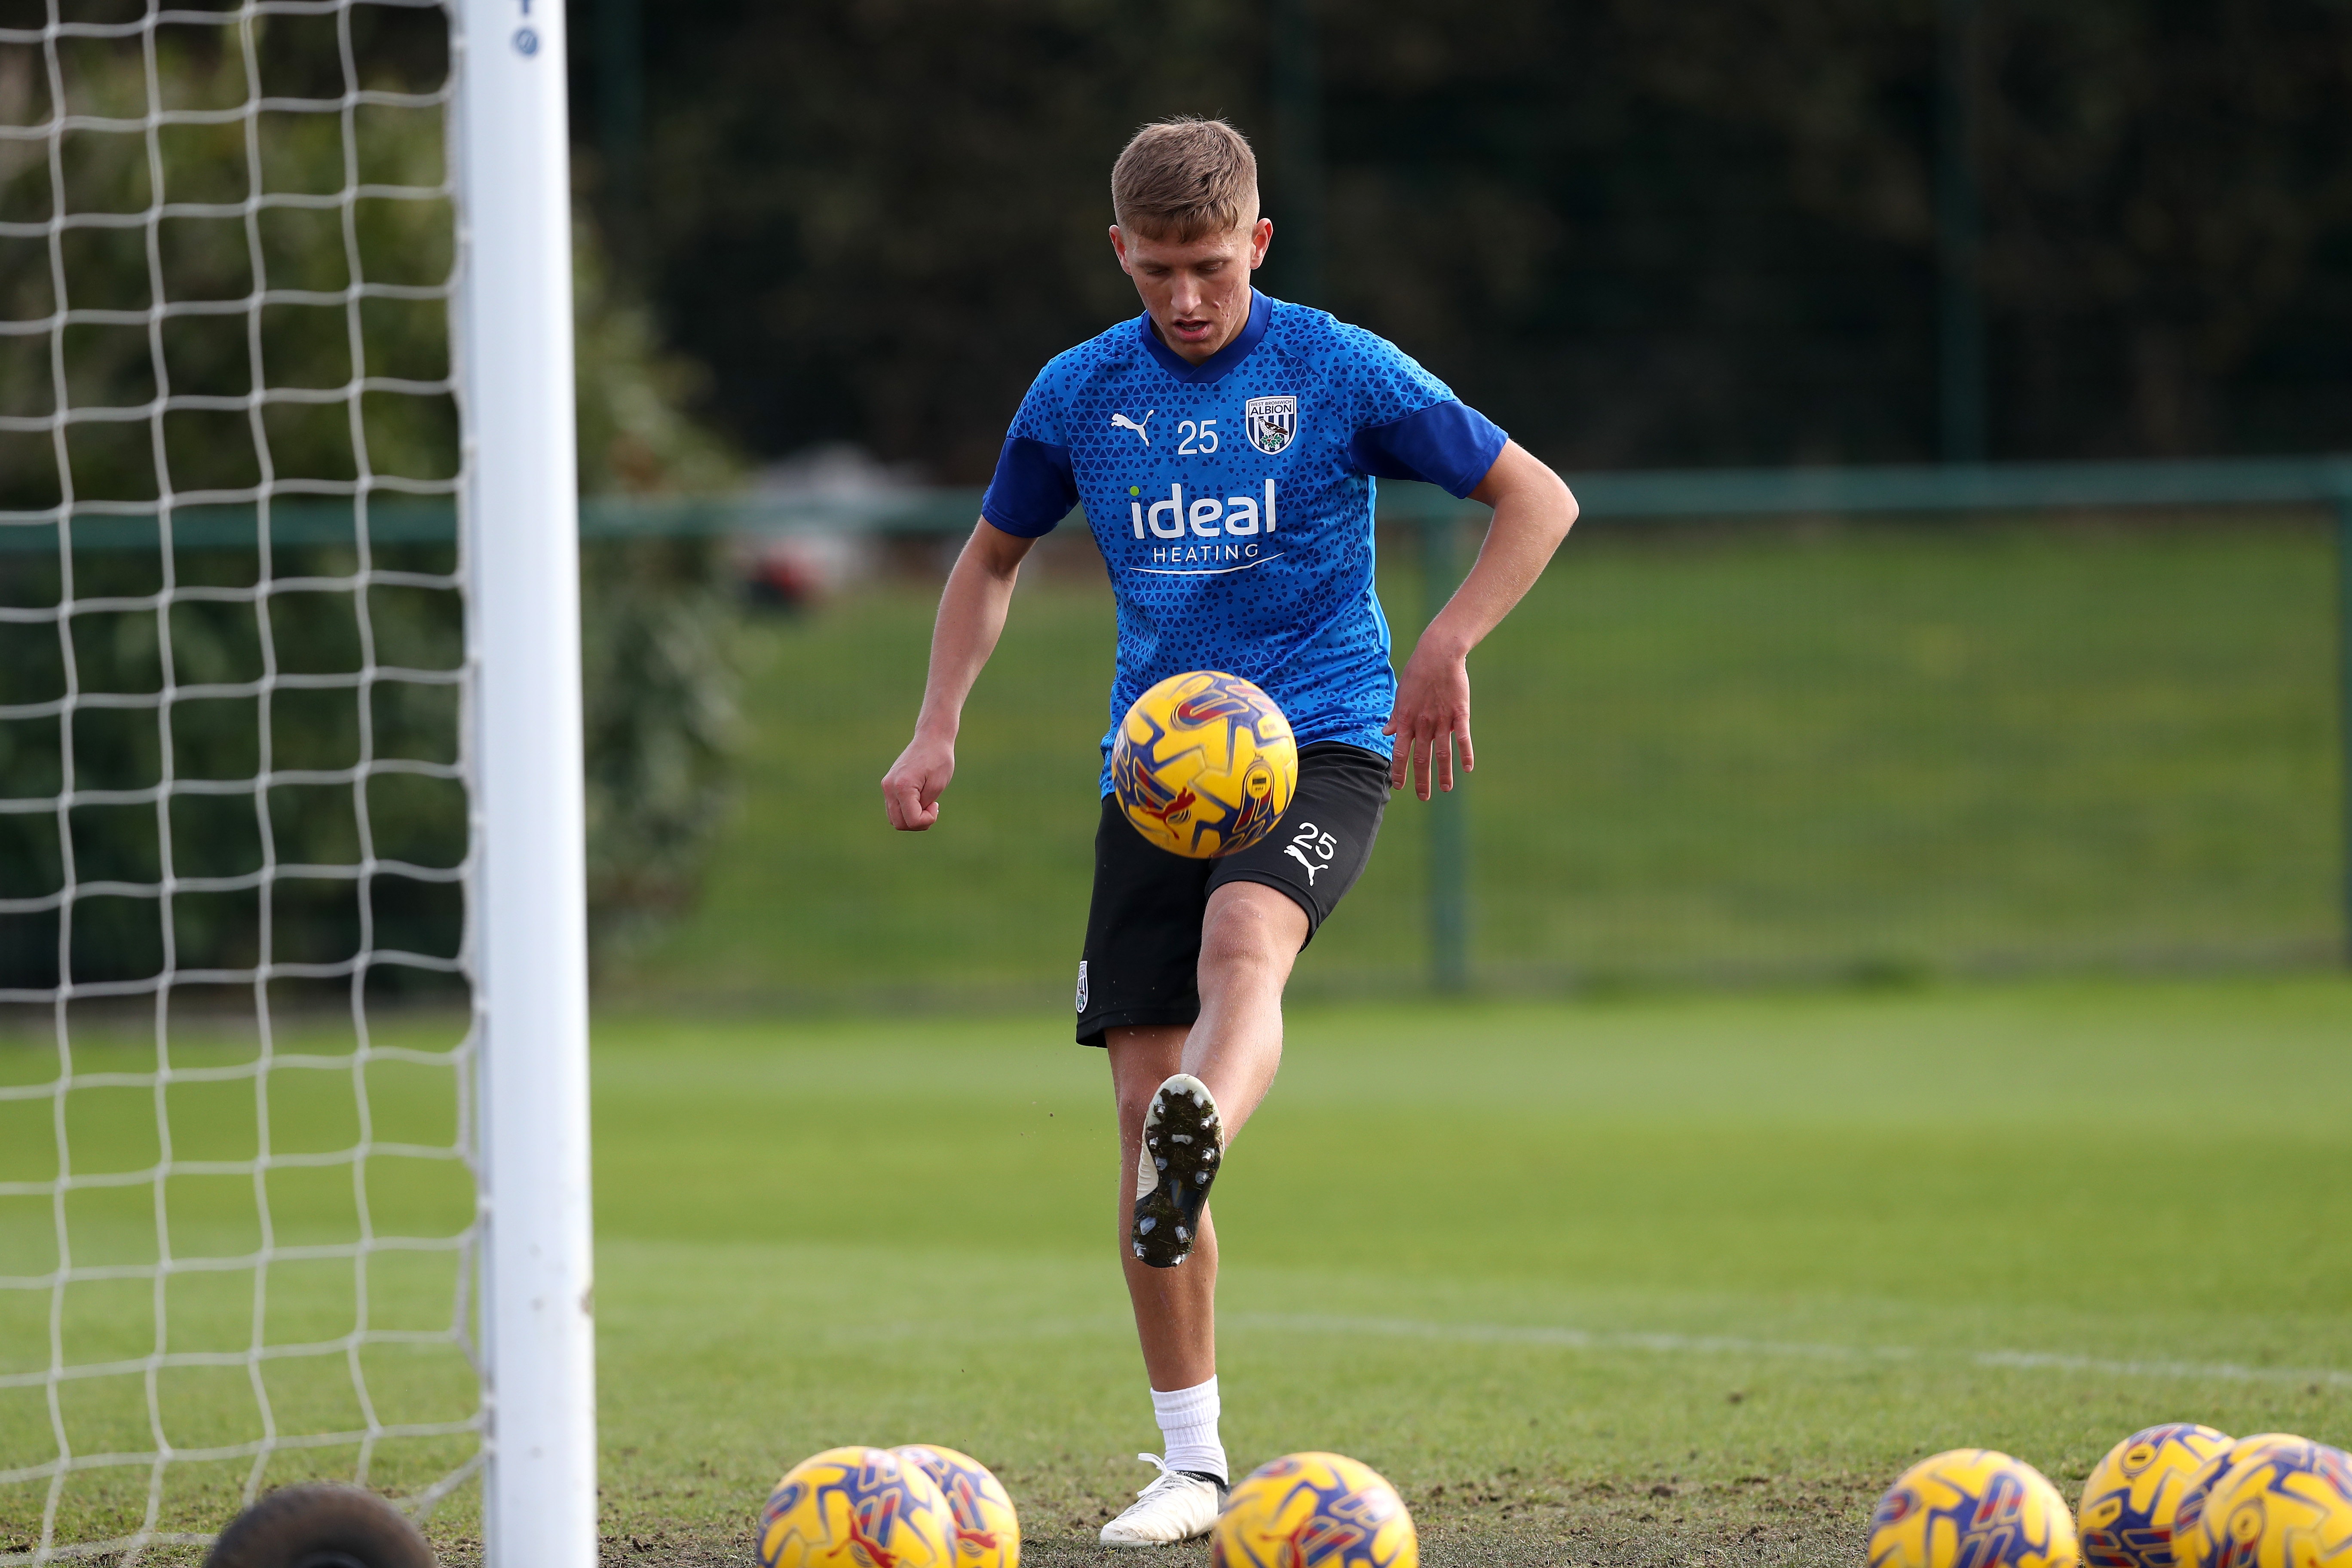 Callum Marshall flicking a ball up during a training session